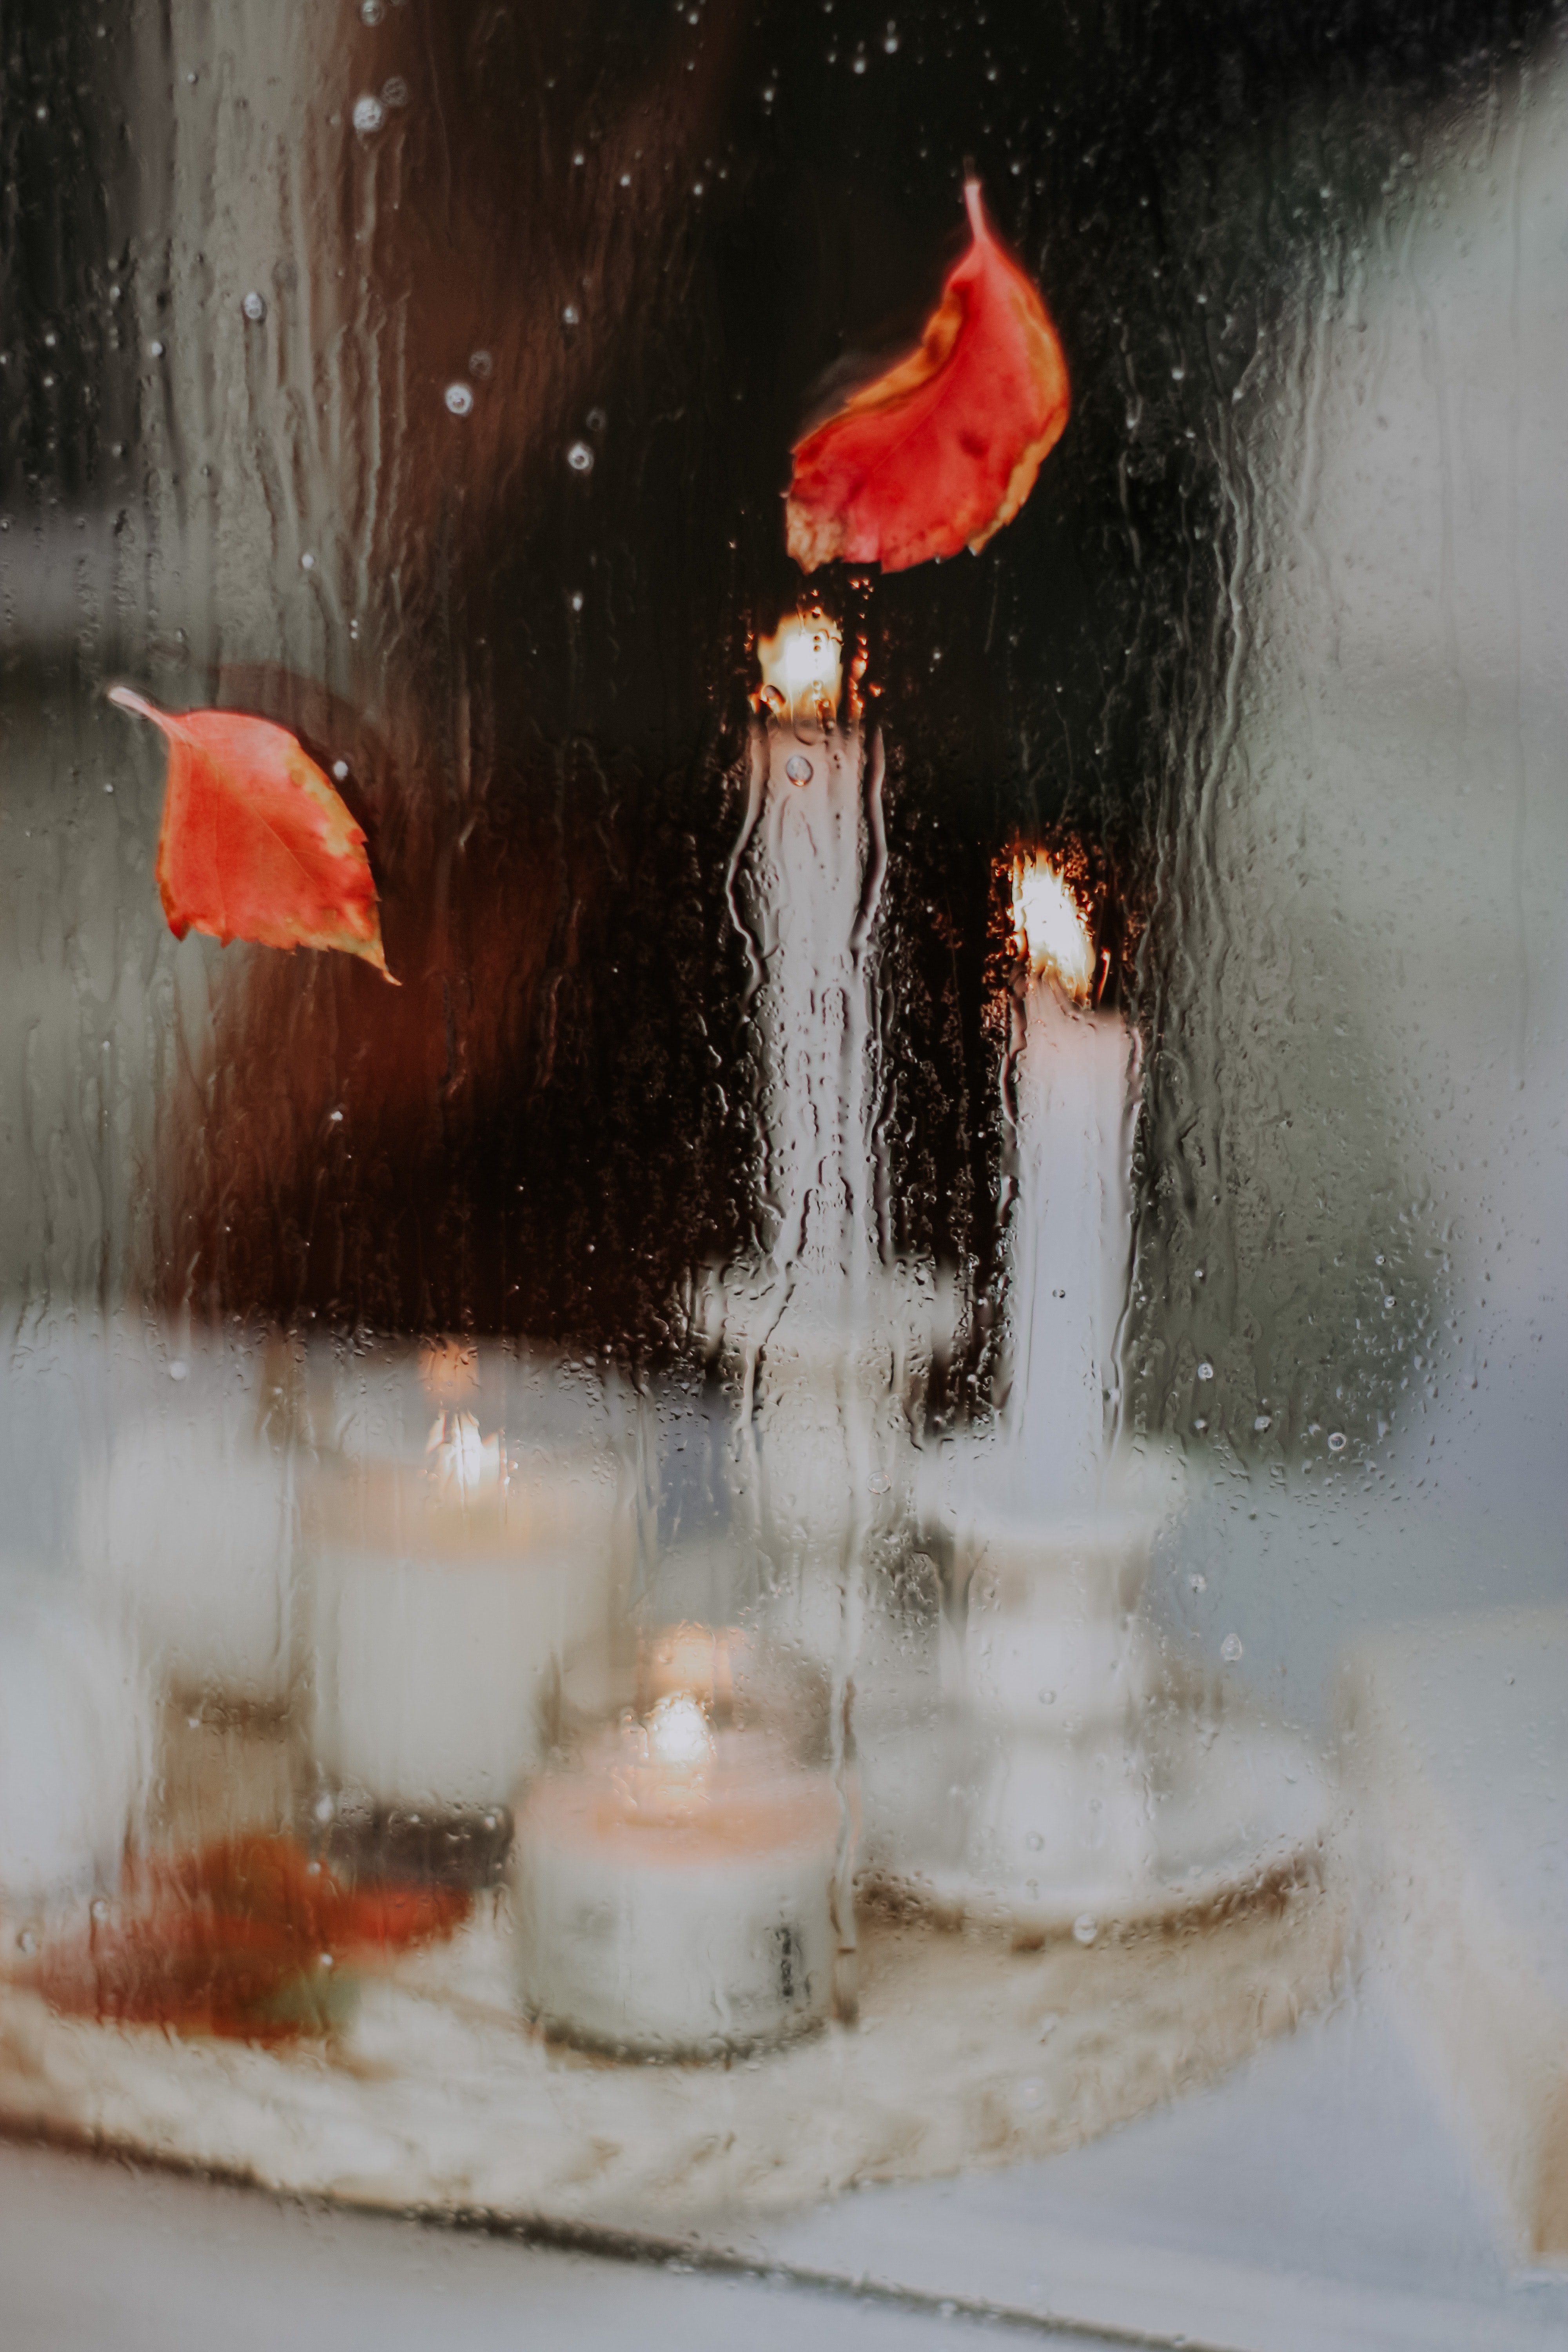 Mobile wallpaper: Candles, Autumn, Leaves, Drops, Miscellanea, Miscellaneous, Divorces, 90504 download the picture for free